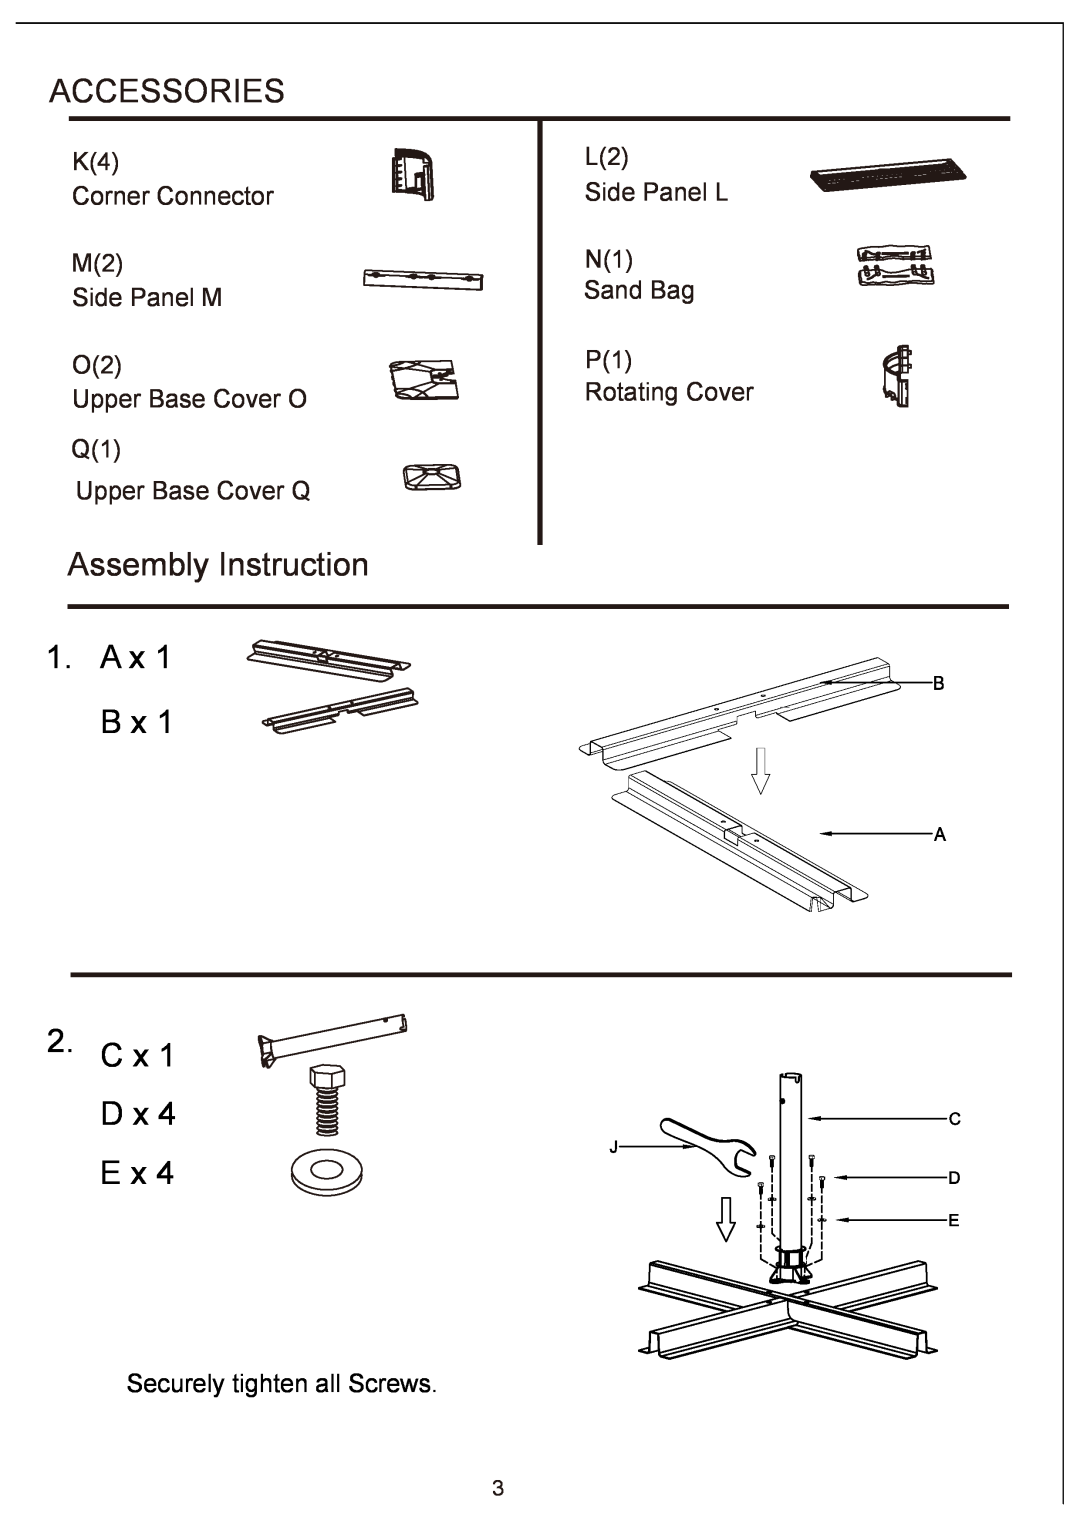 Sears D71 M83925 owner manual Accessories, Assembly Instruction 